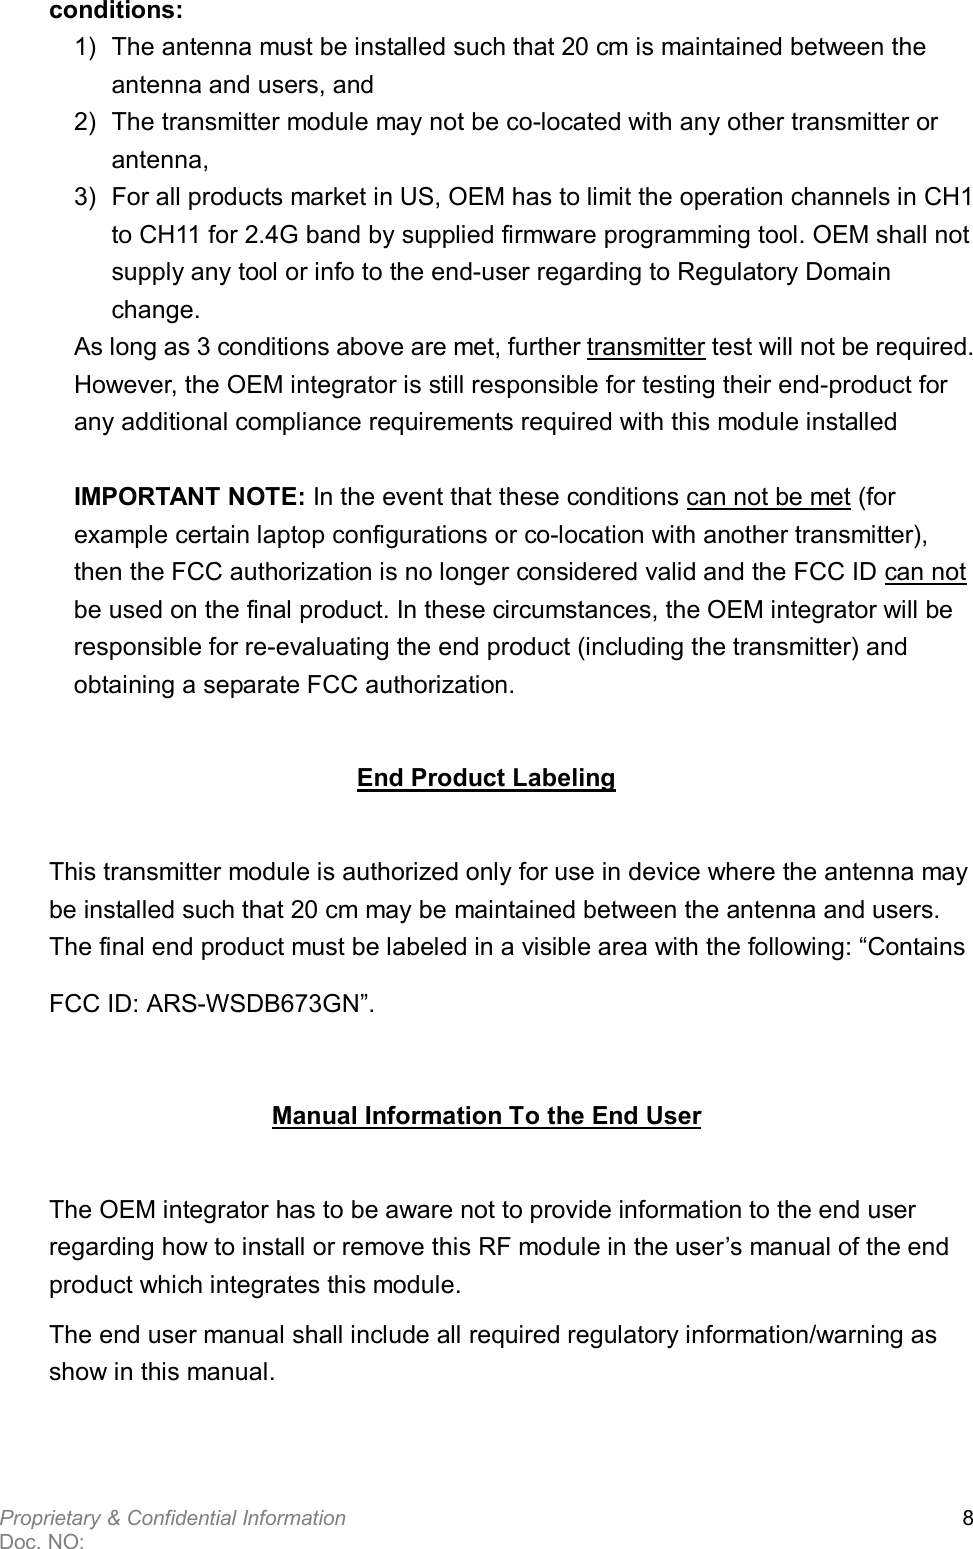  Proprietary &amp; Confidential Information   Doc. NO:   8 conditions: 1)  The antenna must be installed such that 20 cm is maintained between the antenna and users, and   2)  The transmitter module may not be co-located with any other transmitter or antenna,   3)  For all products market in US, OEM has to limit the operation channels in CH1 to CH11 for 2.4G band by supplied firmware programming tool. OEM shall not supply any tool or info to the end-user regarding to Regulatory Domain change. As long as 3 conditions above are met, further transmitter test will not be required. However, the OEM integrator is still responsible for testing their end-product for any additional compliance requirements required with this module installed  IMPORTANT NOTE: In the event that these conditions can not be met (for example certain laptop configurations or co-location with another transmitter), then the FCC authorization is no longer considered valid and the FCC ID can not be used on the final product. In these circumstances, the OEM integrator will be responsible for re-evaluating the end product (including the transmitter) and obtaining a separate FCC authorization. End Product Labeling This transmitter module is authorized only for use in device where the antenna may be installed such that 20 cm may be maintained between the antenna and users. The final end product must be labeled in a visible area with the following: “Contains FCC ID: ARS-WSDB673GN”. Manual Information To the End User The OEM integrator has to be aware not to provide information to the end user regarding how to install or remove this RF module in the user’s manual of the end product which integrates this module. The end user manual shall include all required regulatory information/warning as show in this manual.  